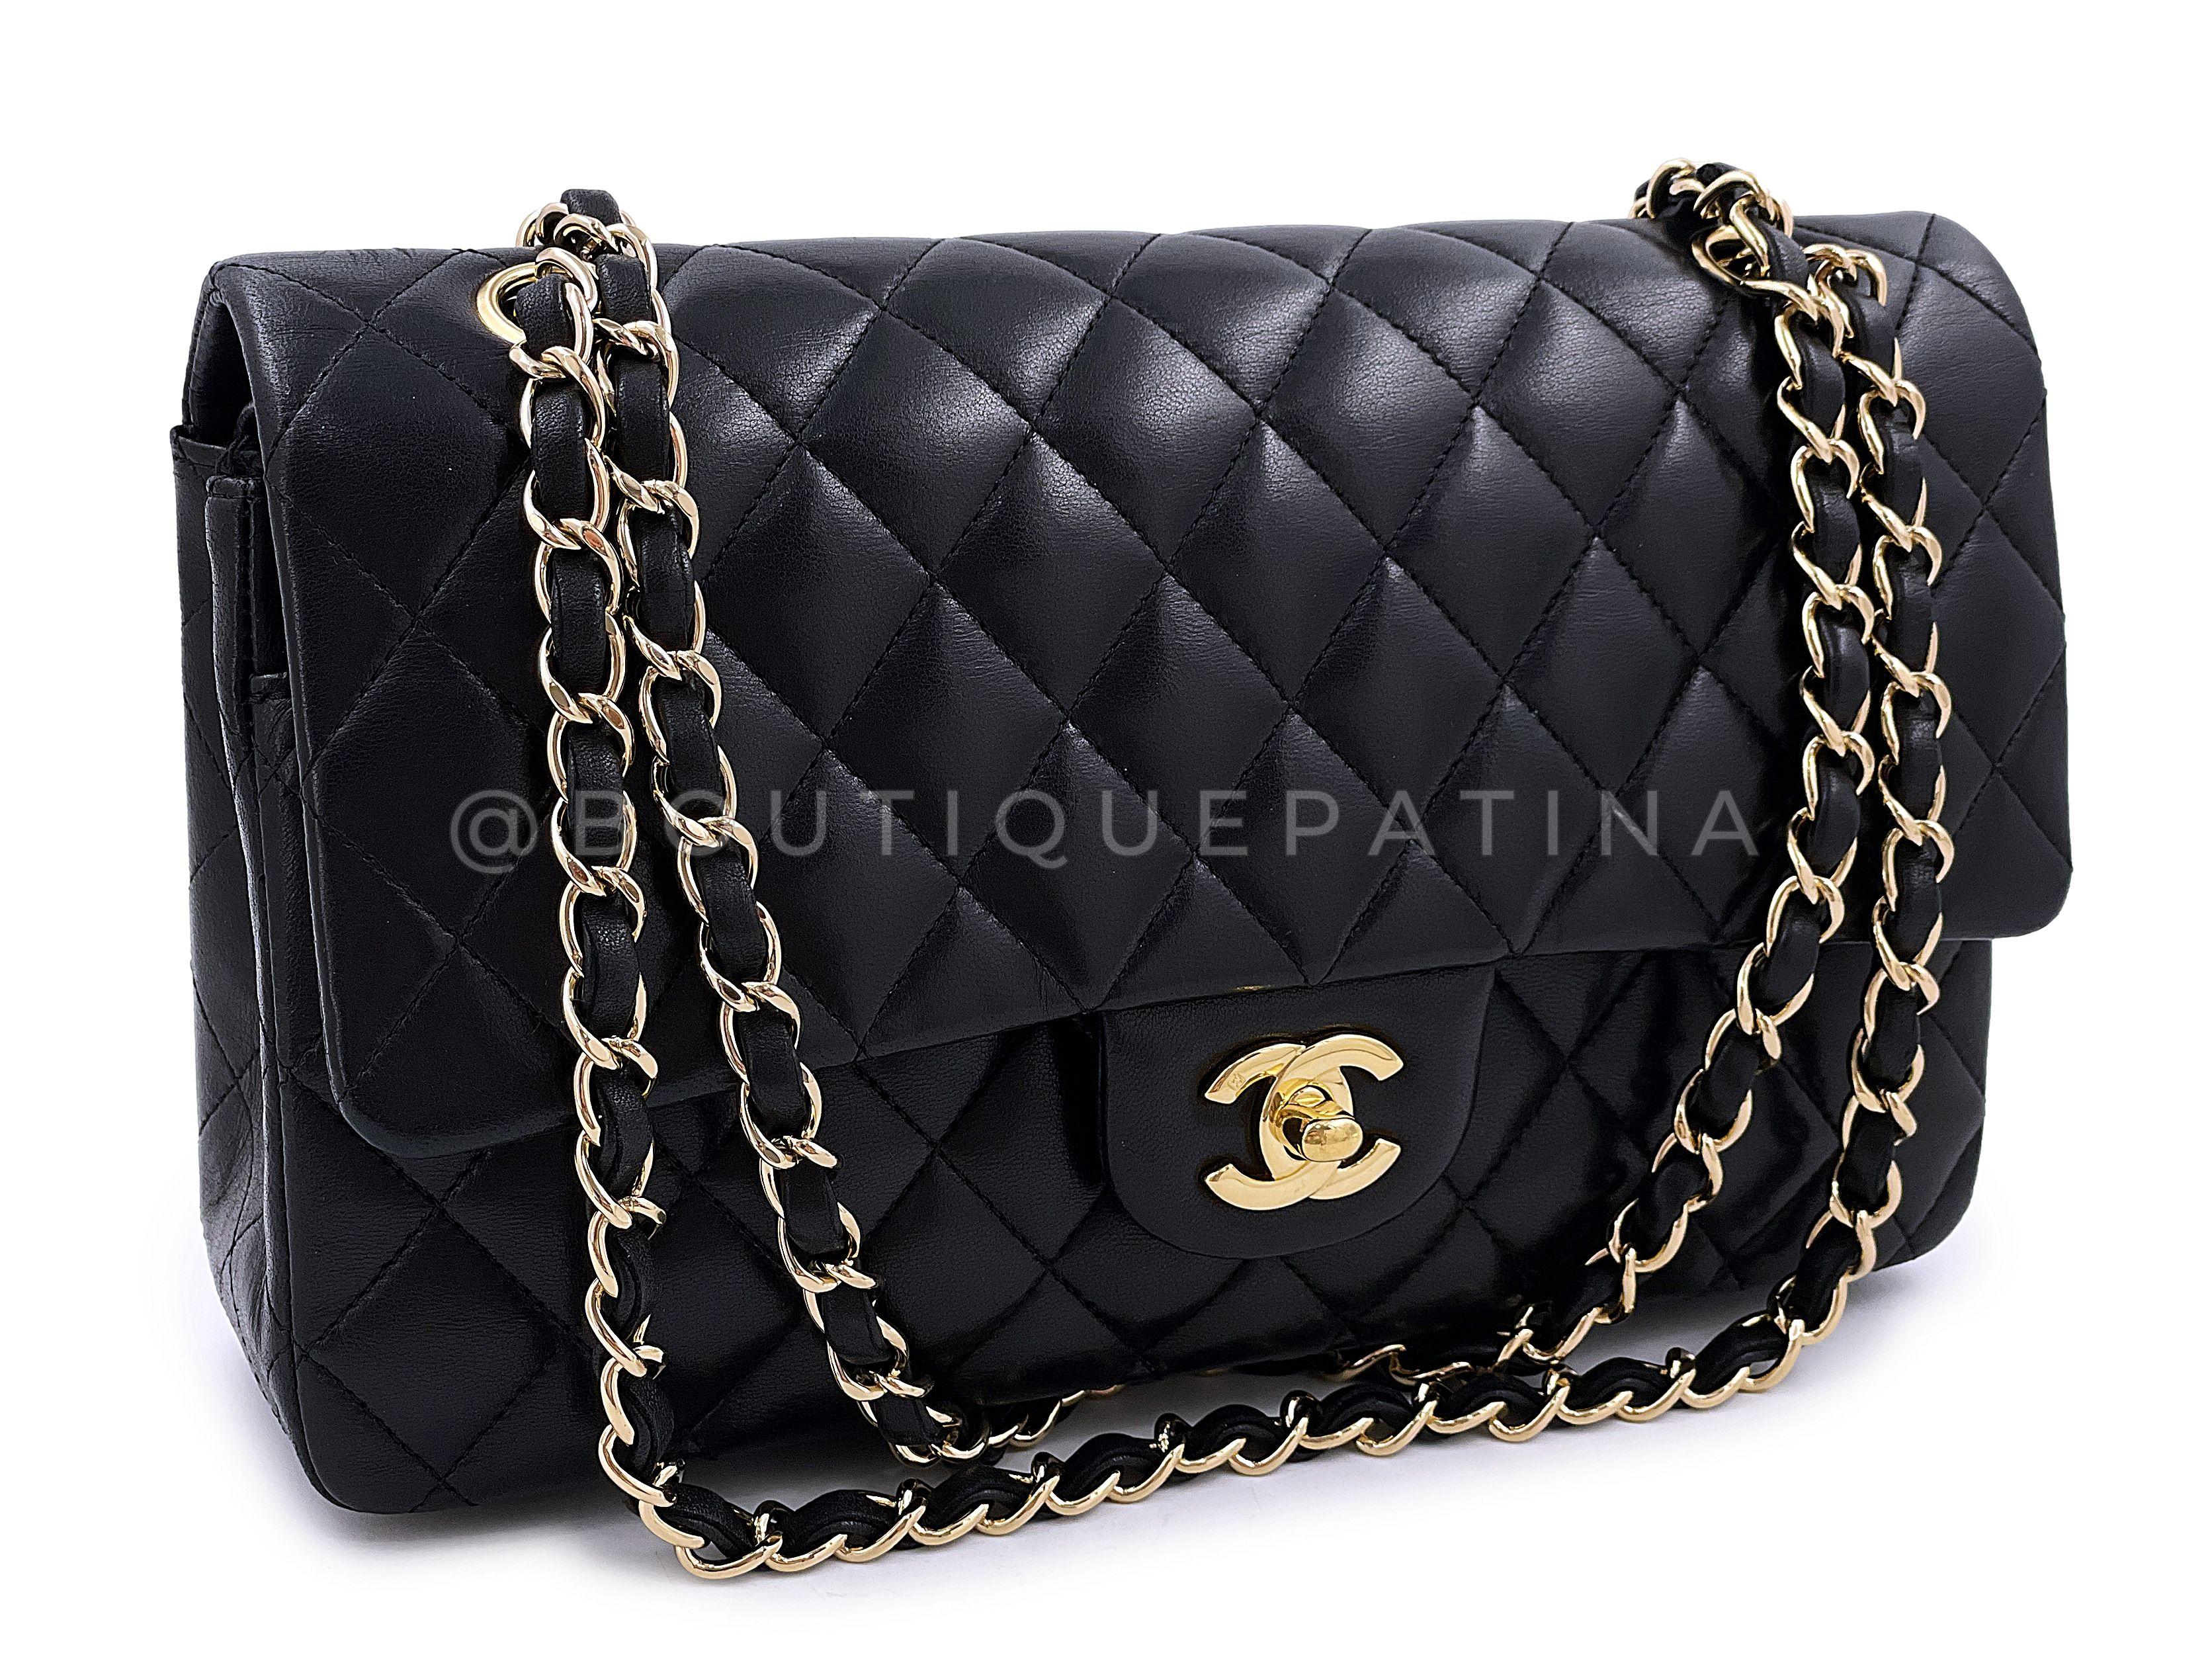 Store item: 67582
Rare and puffy vintage nearly-20 year old medium classic with the original 24k gold plated hardware, yet with puffy quilts, the best of both worlds. 

The iconic holy grail bag is the Chanel Classic Flap. Coveted for its simplicity